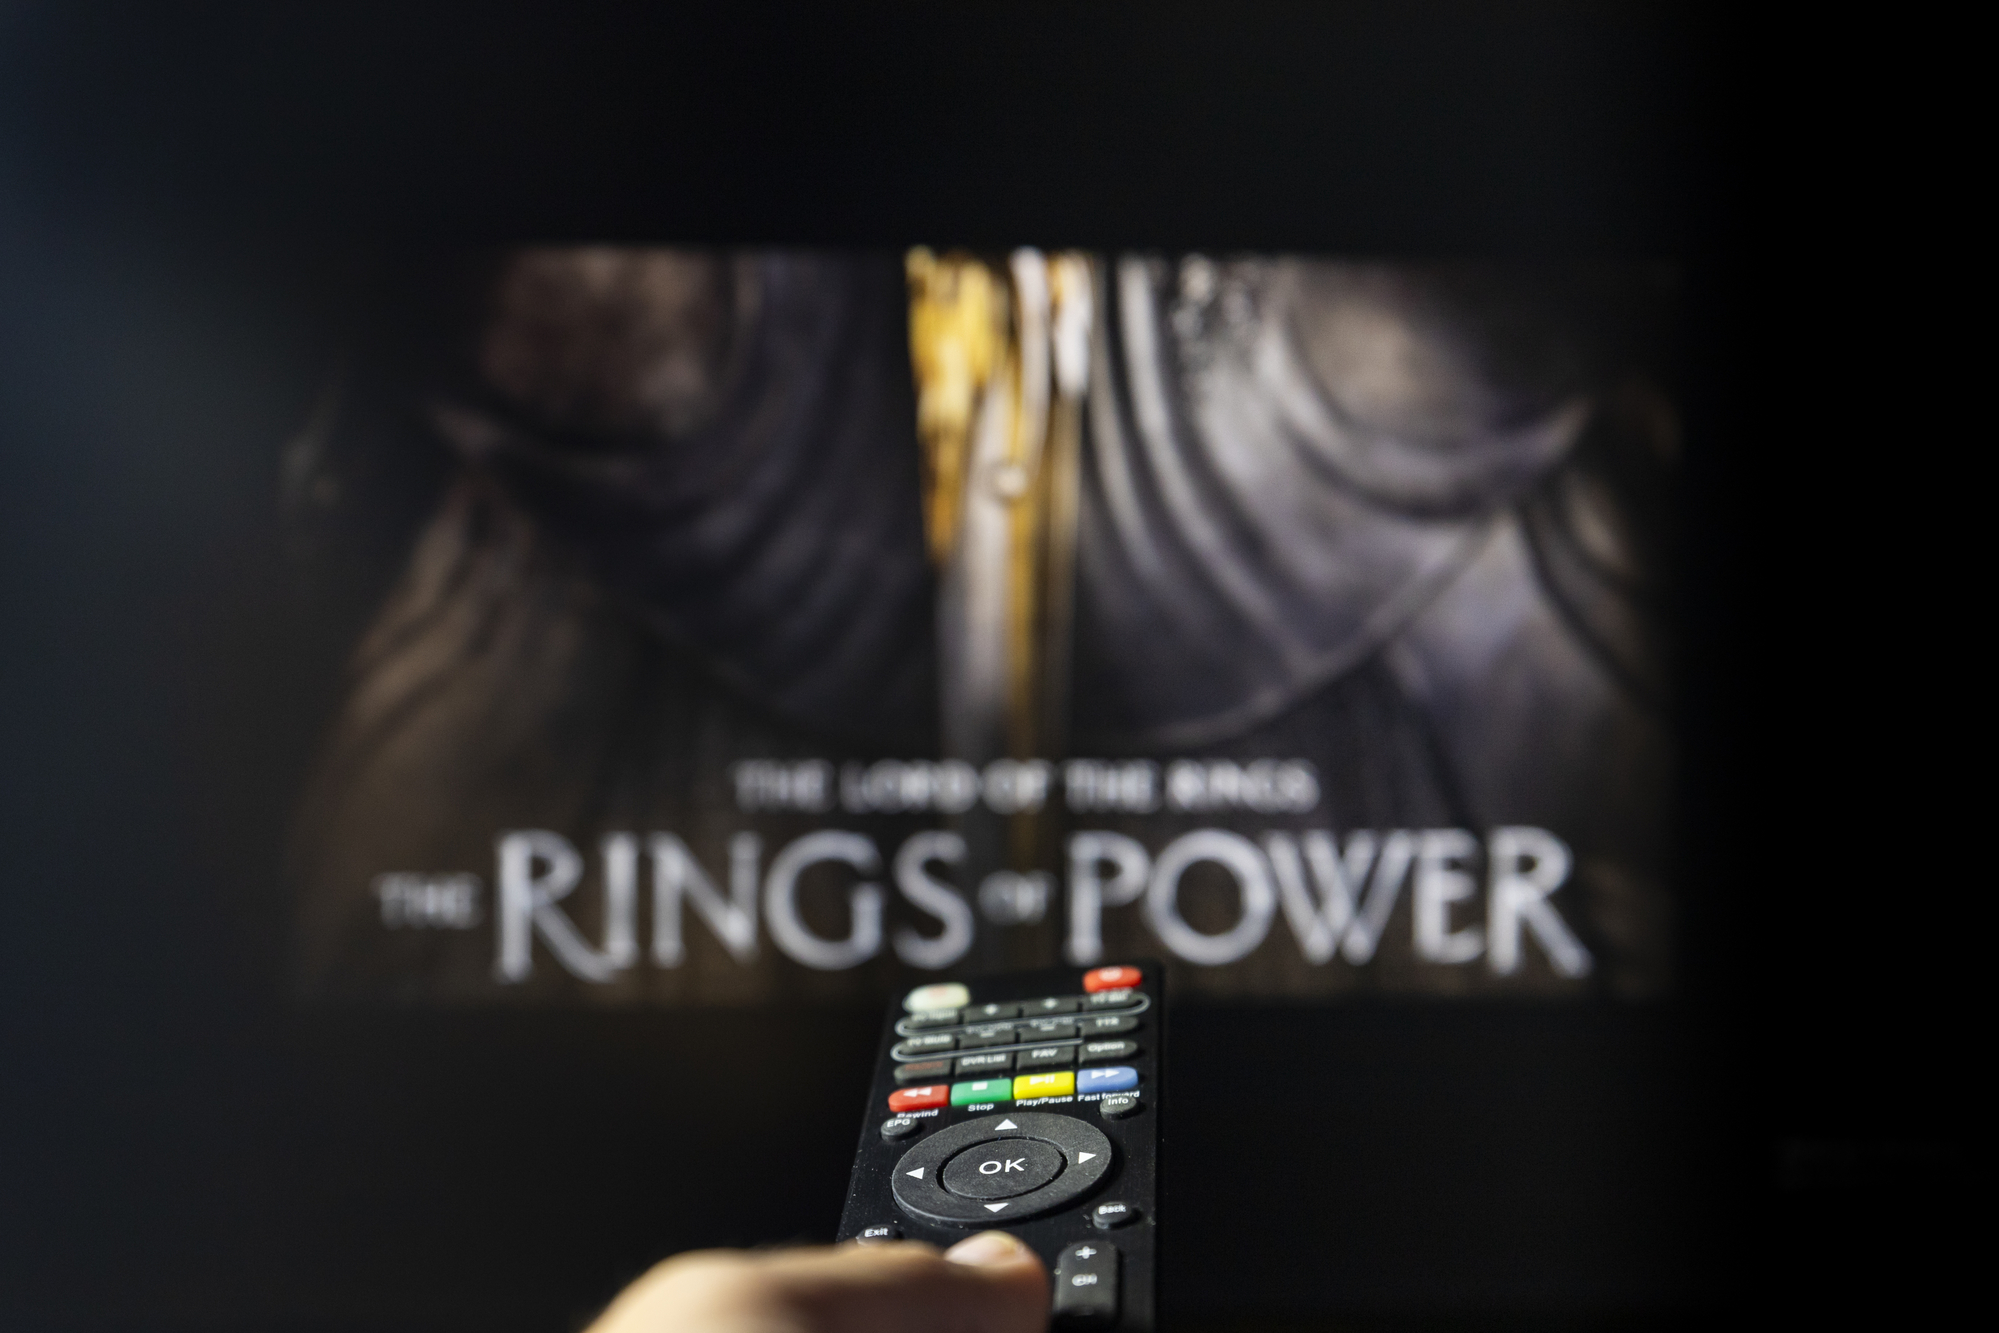 photograph of The Rings of Power TV series on TV with remote control in hand